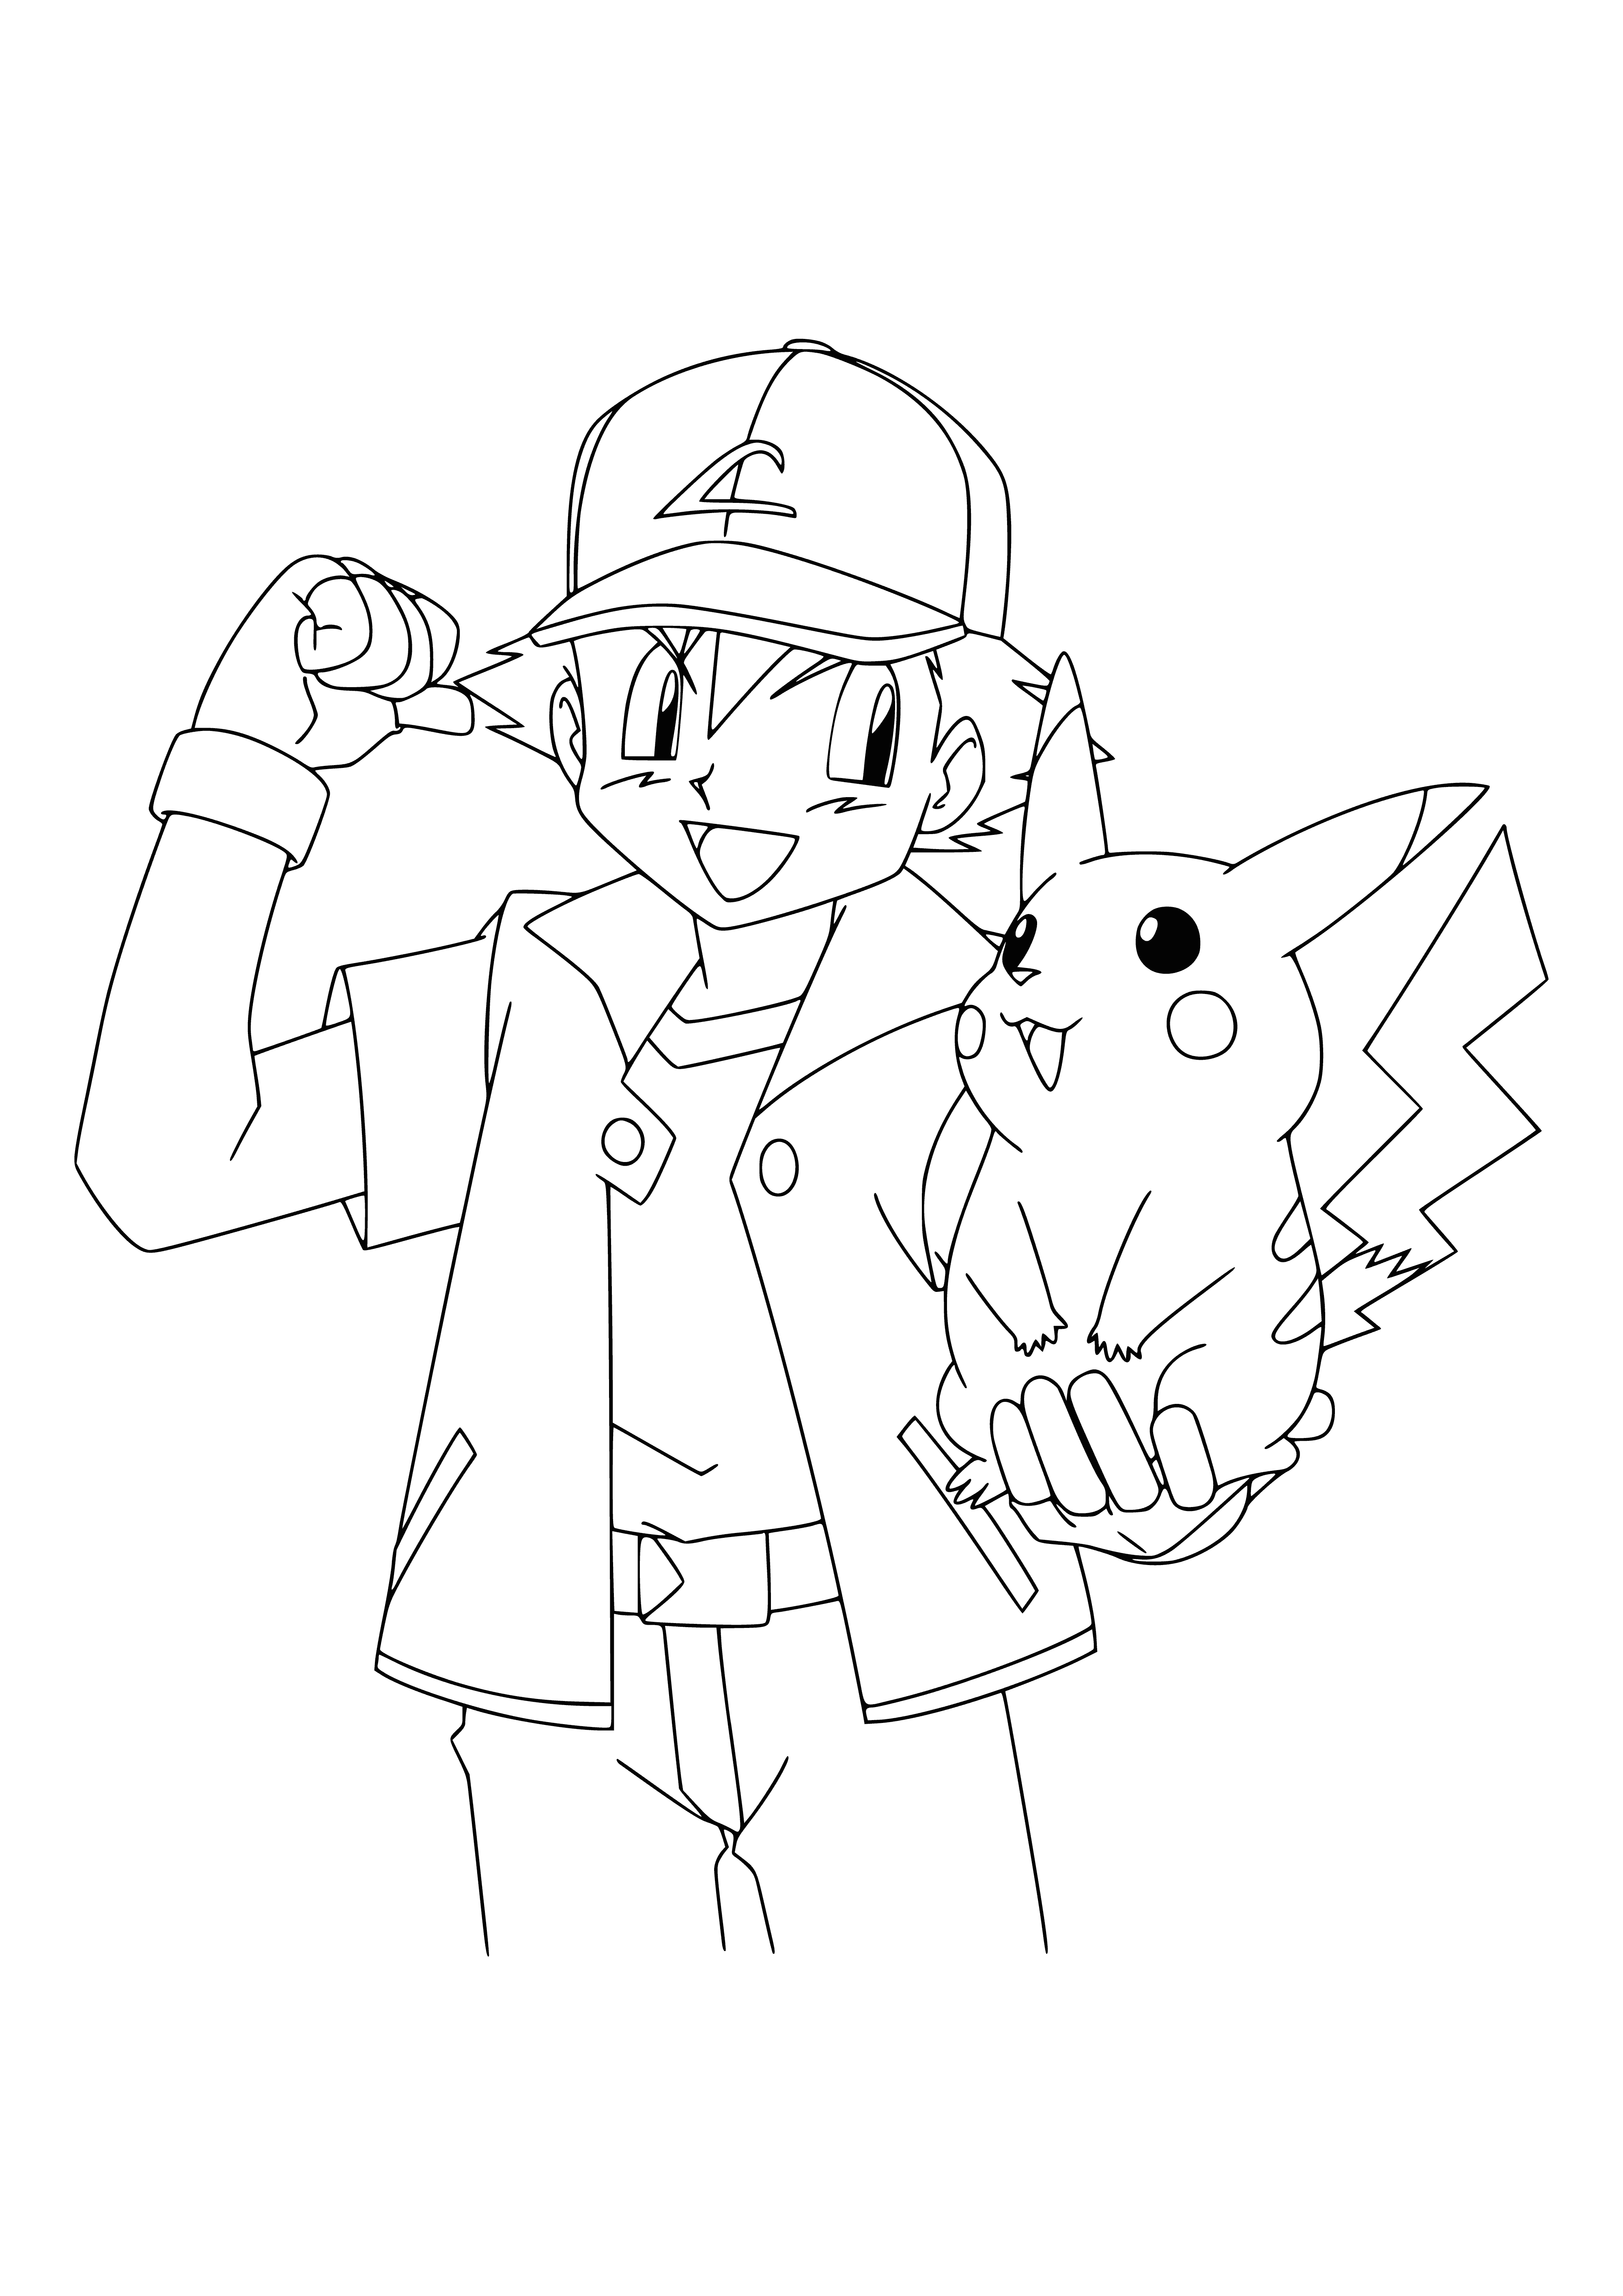 coloring page: Ash and Pikachu, a yellow creature with black stripes, together. Ash has black hair, red and white shirt & black backpack. Pikachu on his shoulder.